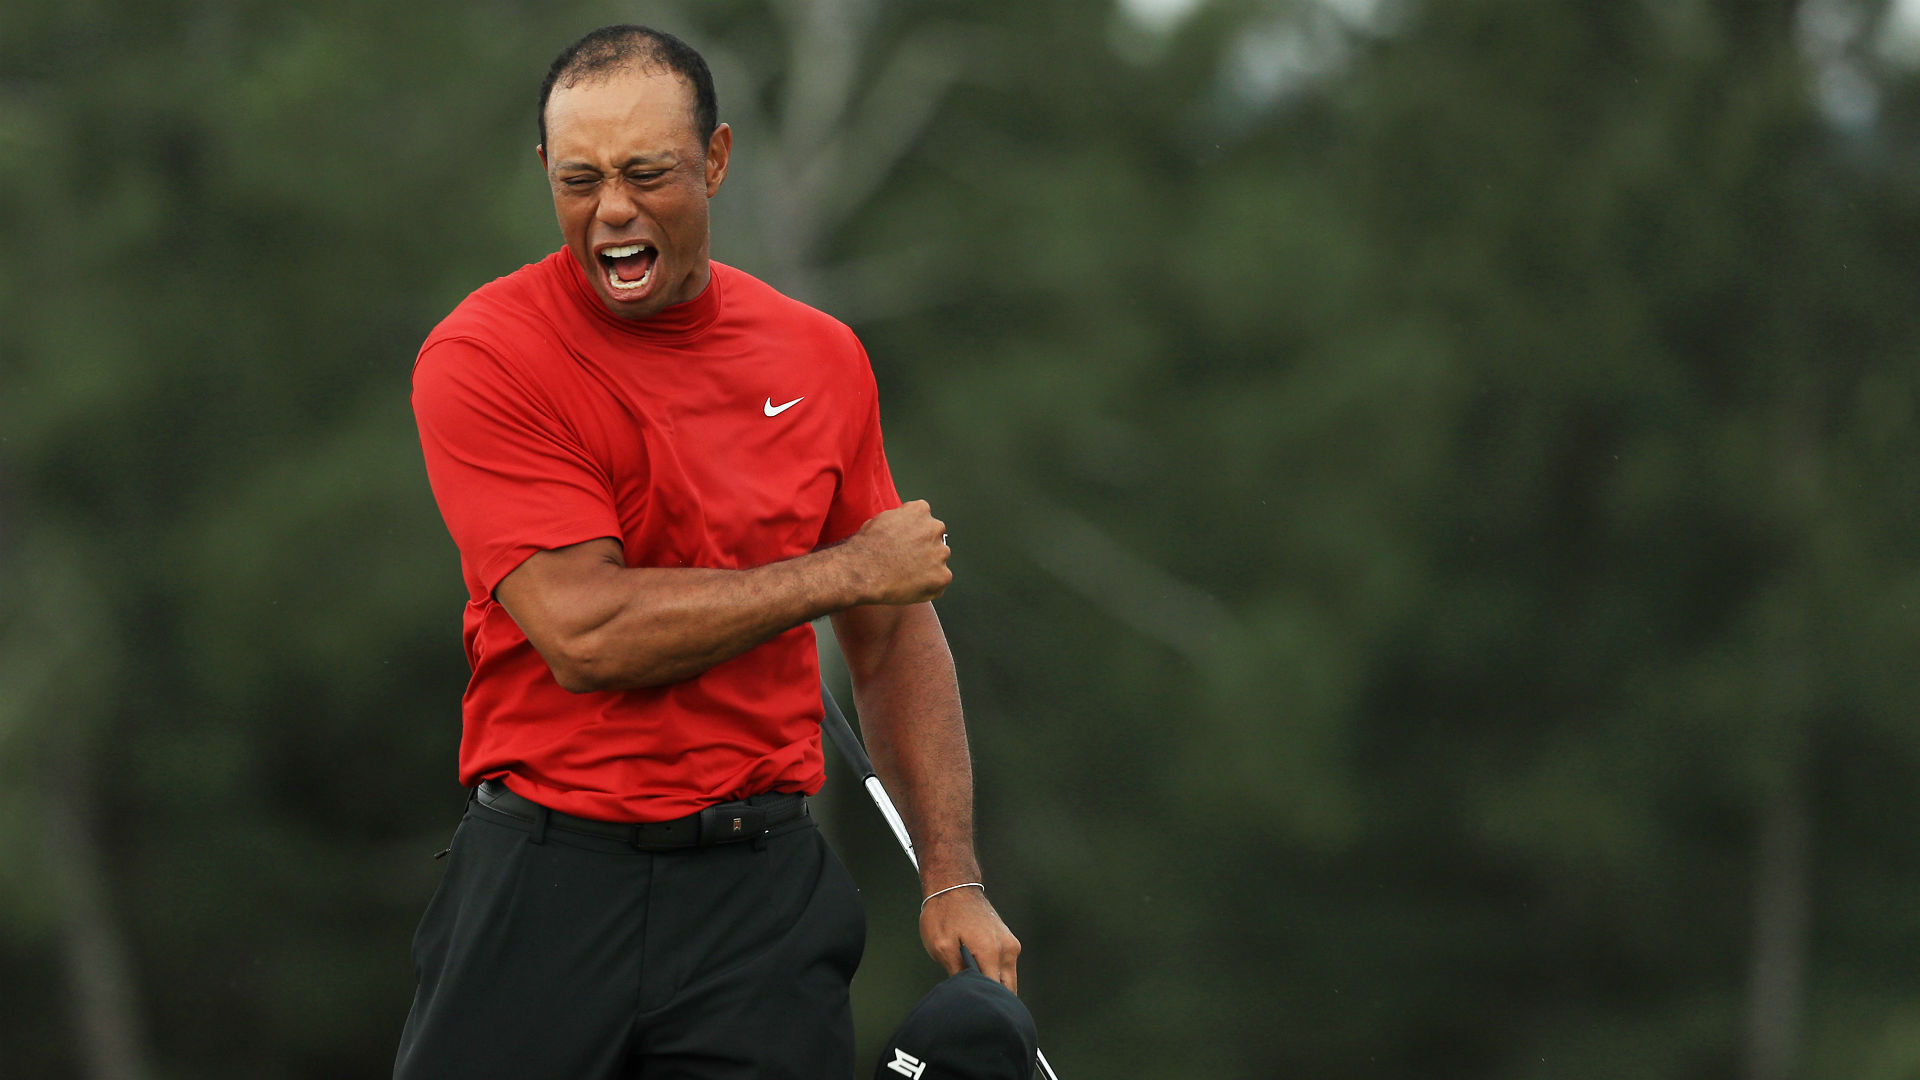 Tiger Woods' name cleared from pending wrongful death lawsuit